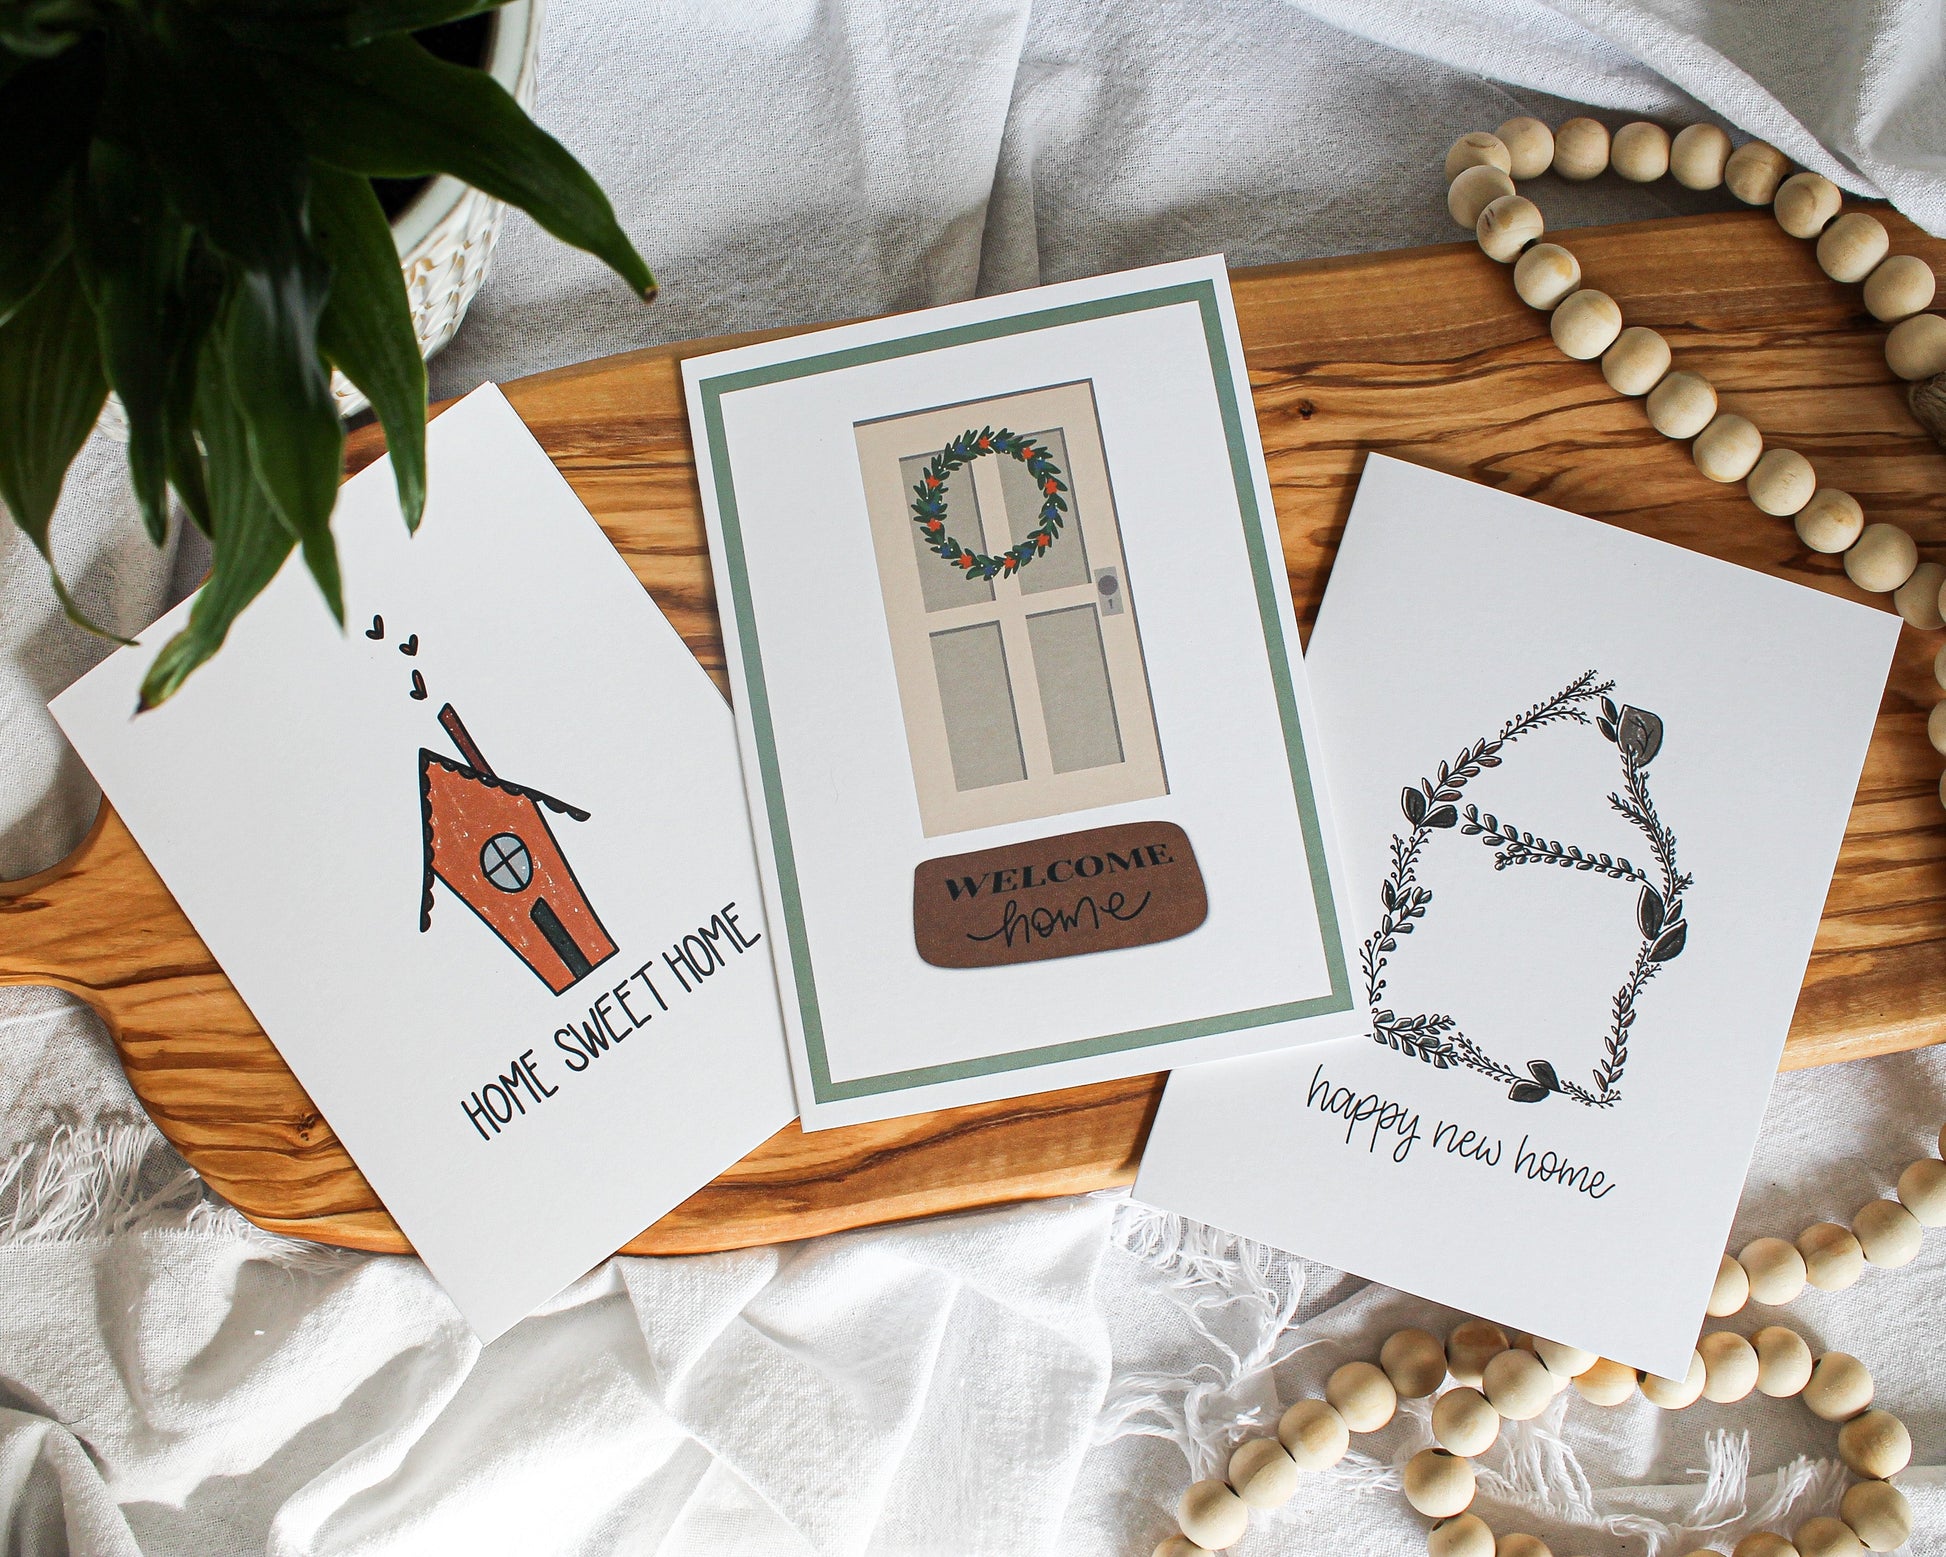 Three new home greeting cards laying flat on a olive wood serving board